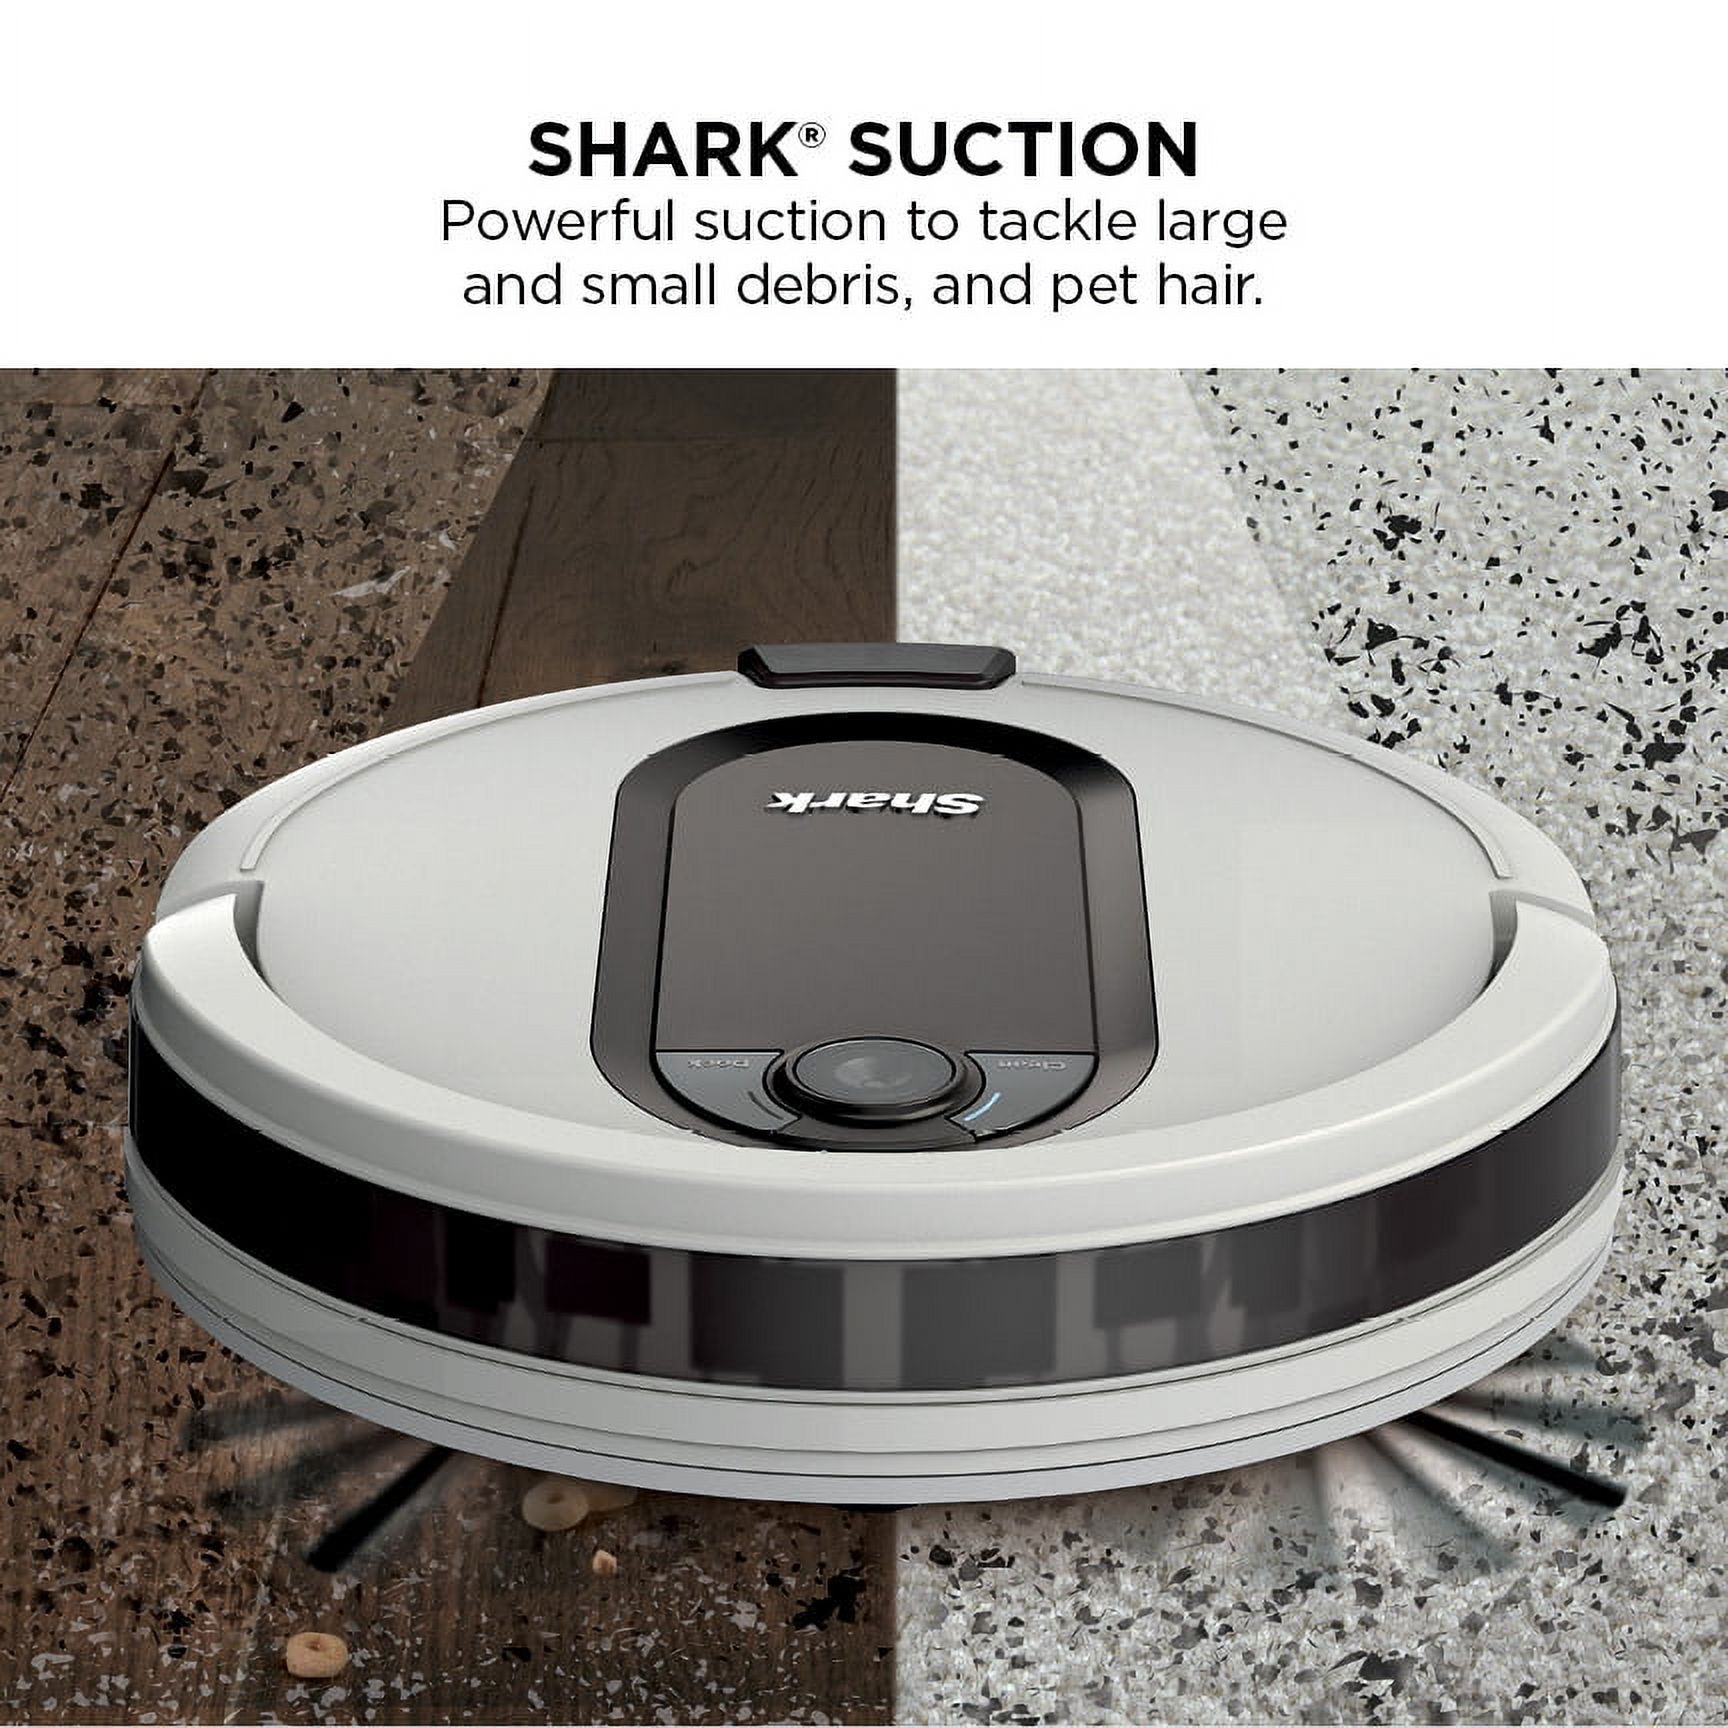 Shark EZ Robot Vacuum with Self-Empty Base, Bagless, Works with Google Assistant, White (RV913S) - image 5 of 6